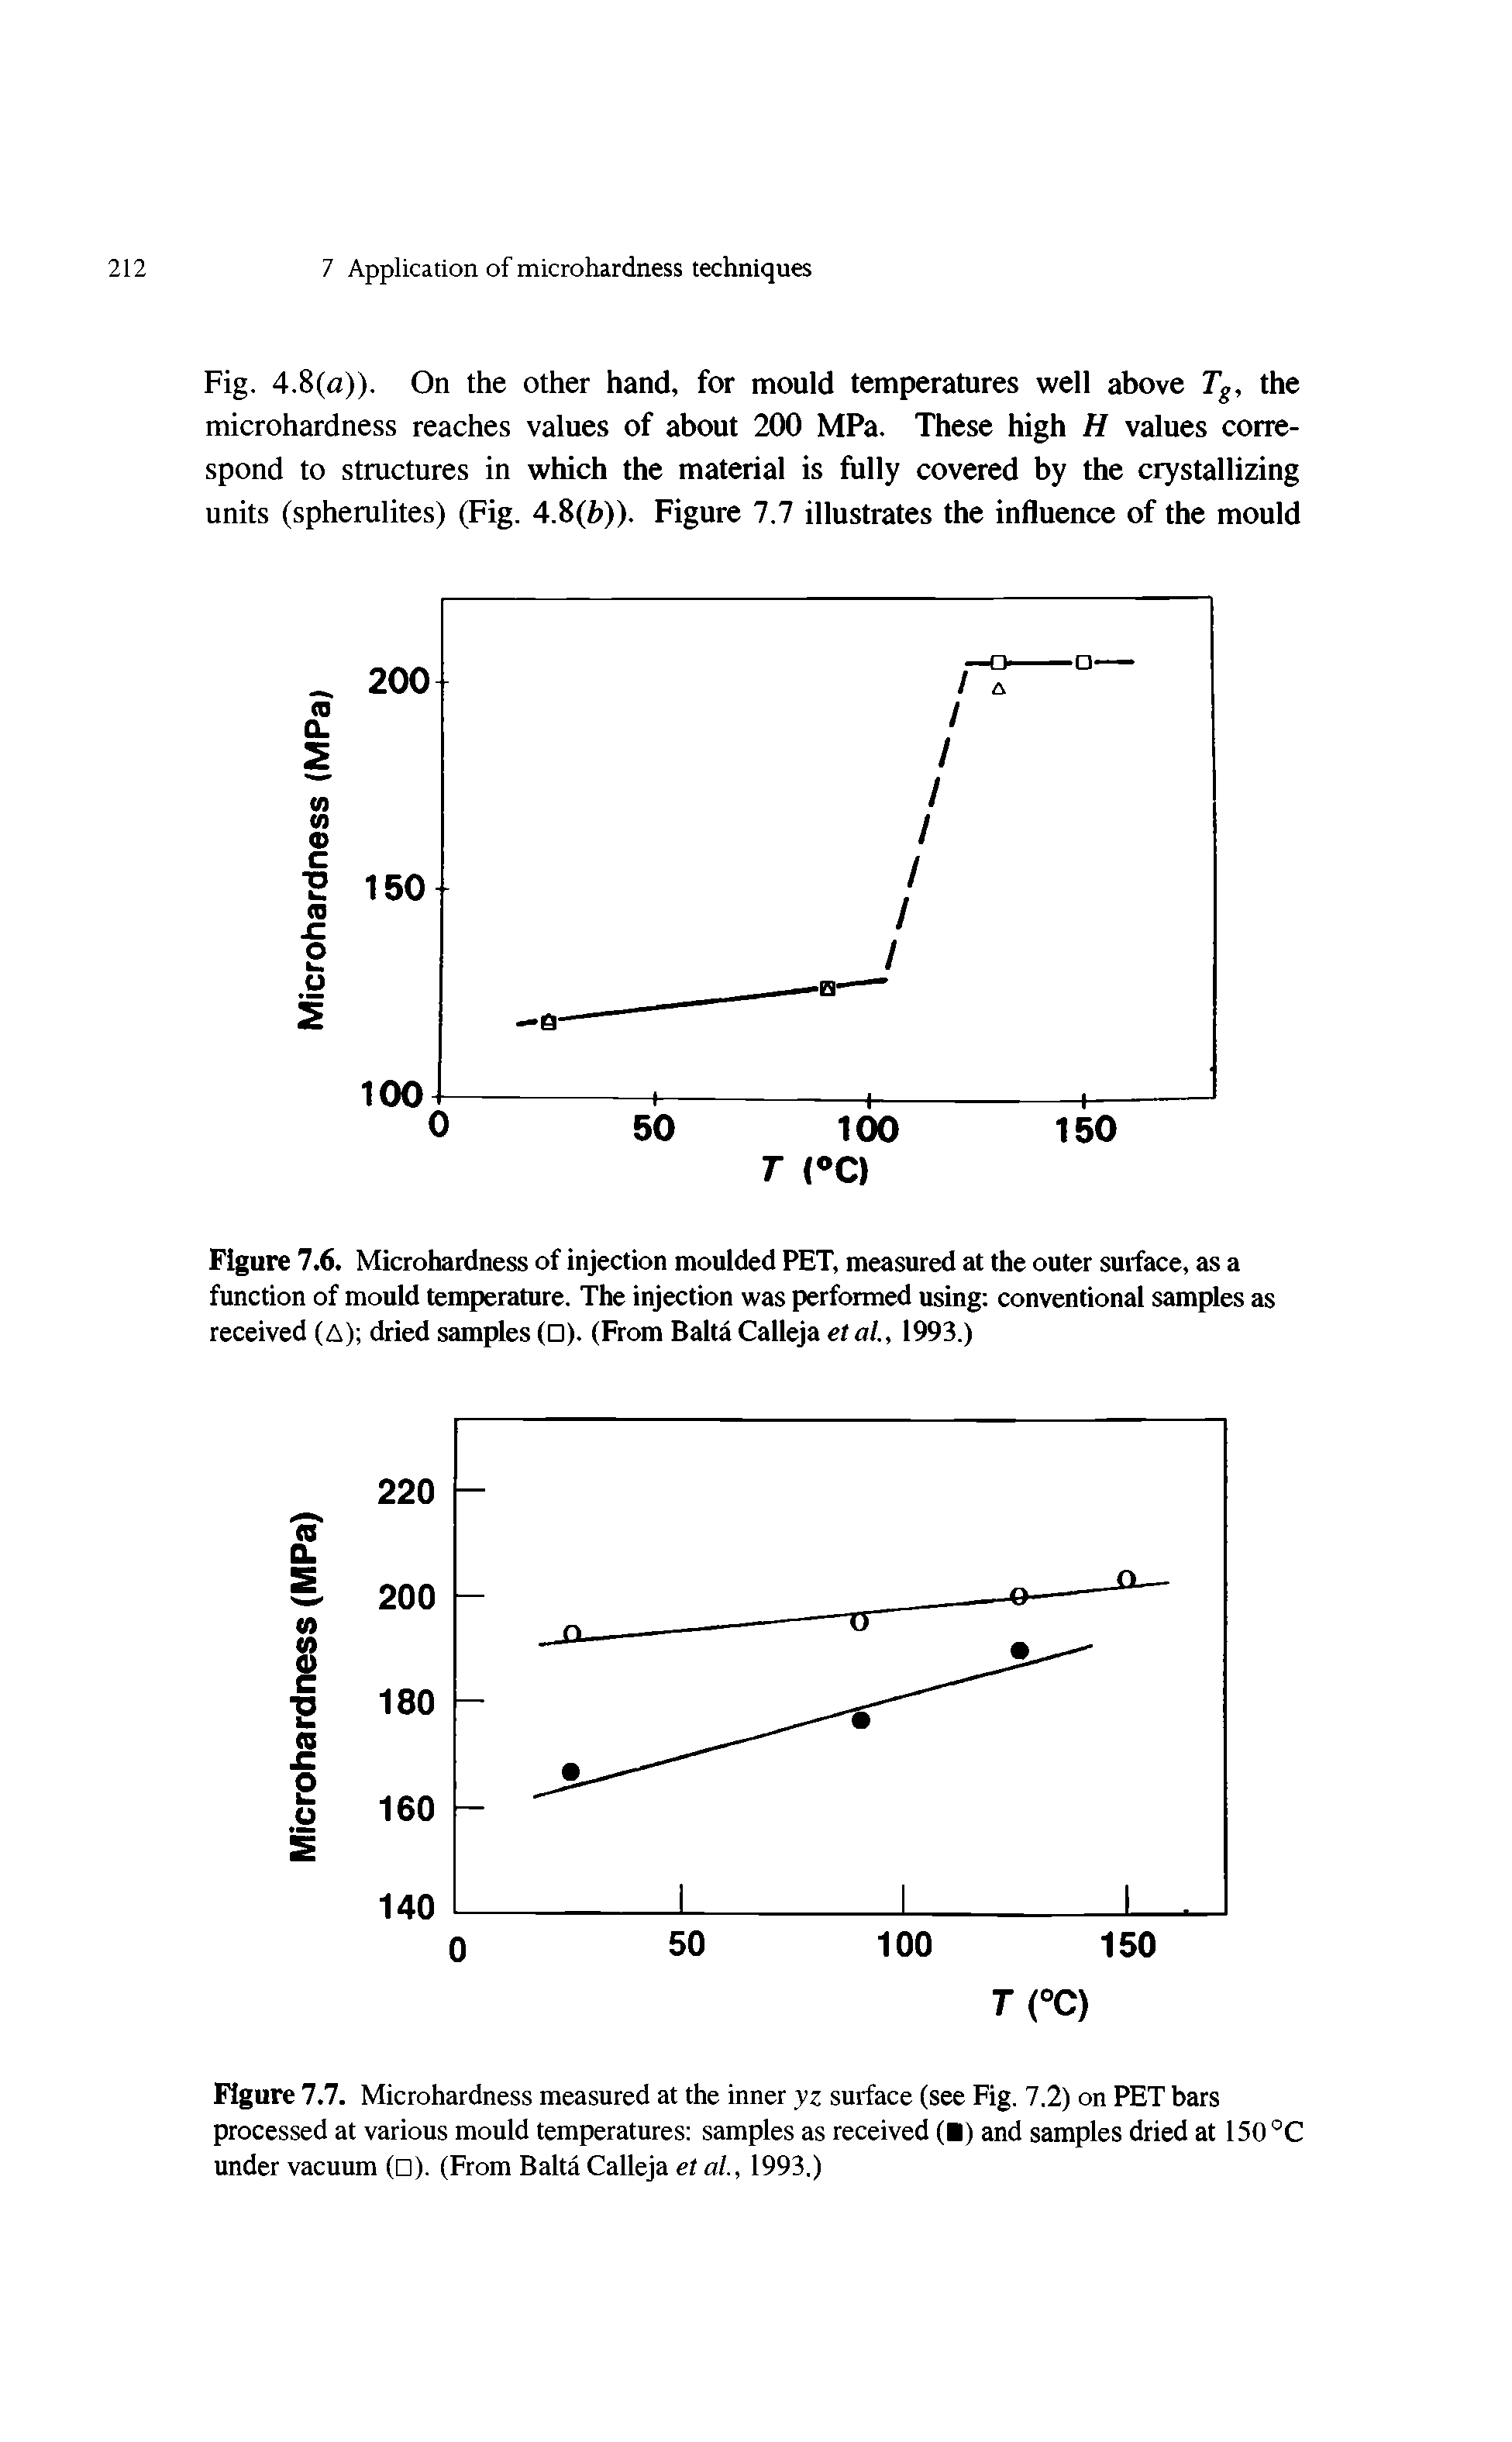 Figure 7.7. Microhardness measured at the inner yz surface (see Fig. 7.2) on PET bars processed at various mould temperatures samples as received (I) and samples dried at 150 °C under vacuum ( ). (From Balta Calleja et al, 1993.)...